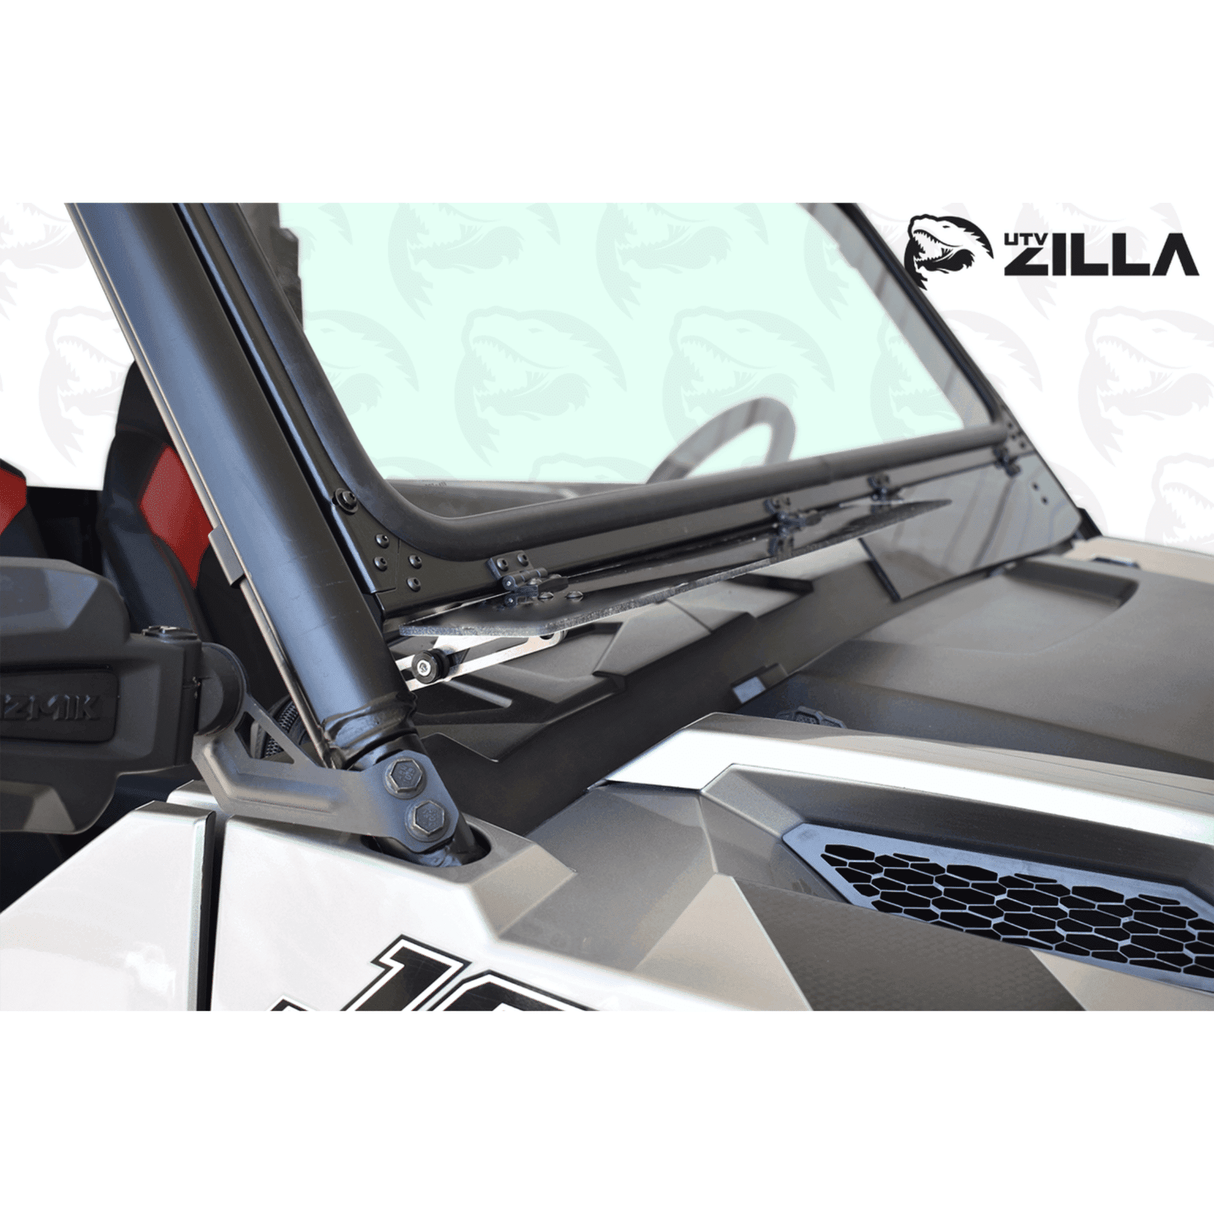 Polaris General Vented Glass Windshield (2016+) - R1 Industries